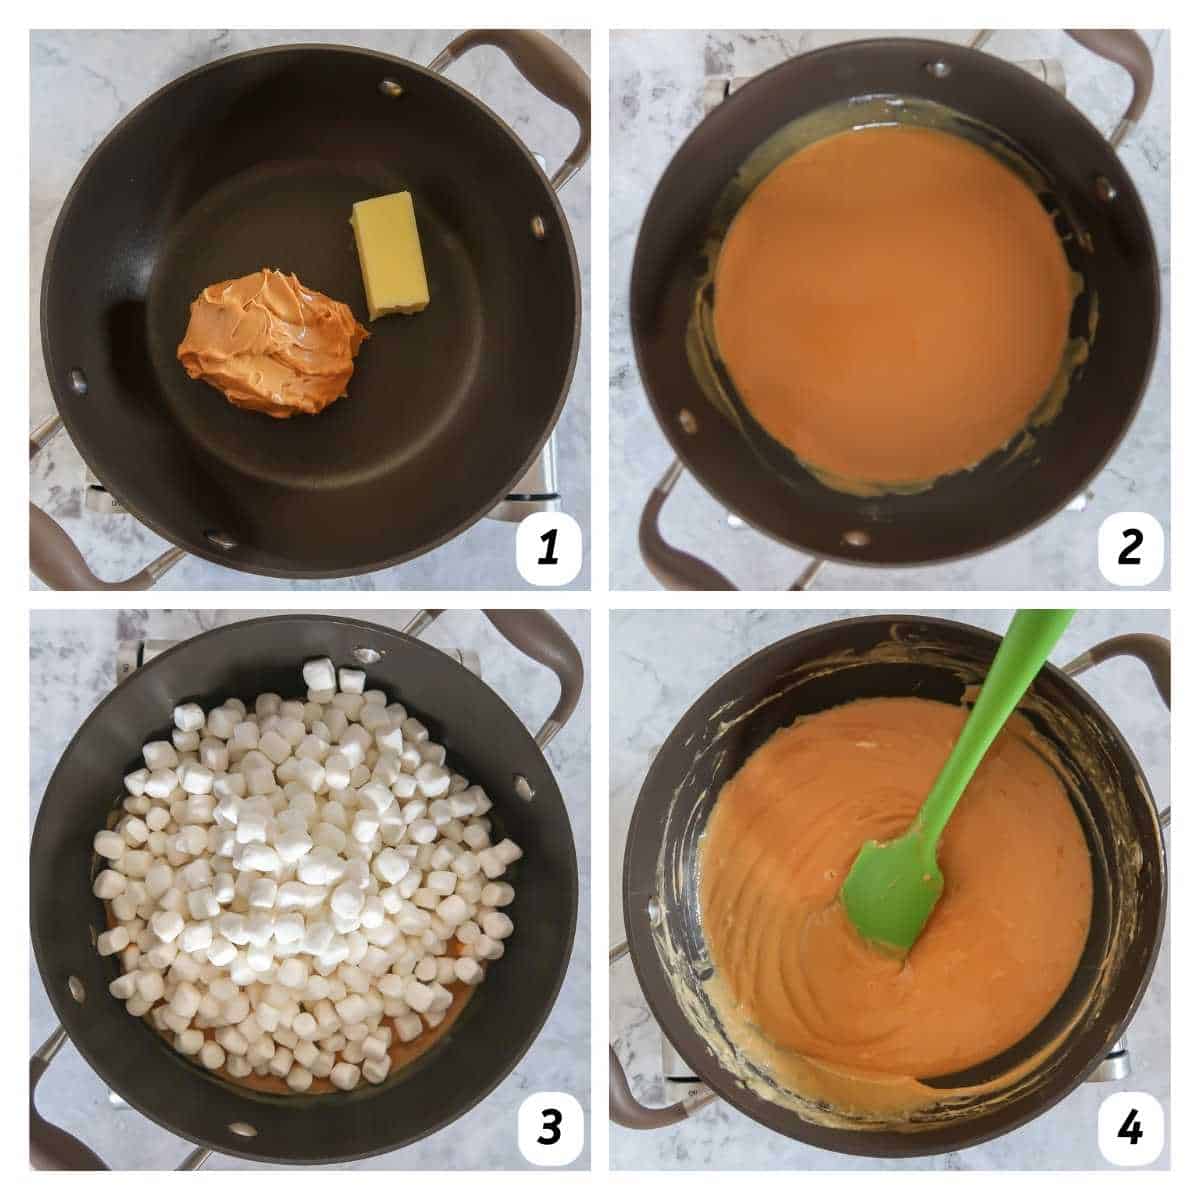 Four panel grid of process shots 1-4 - melting butter, peanut butter, and marshmallows in a pan.